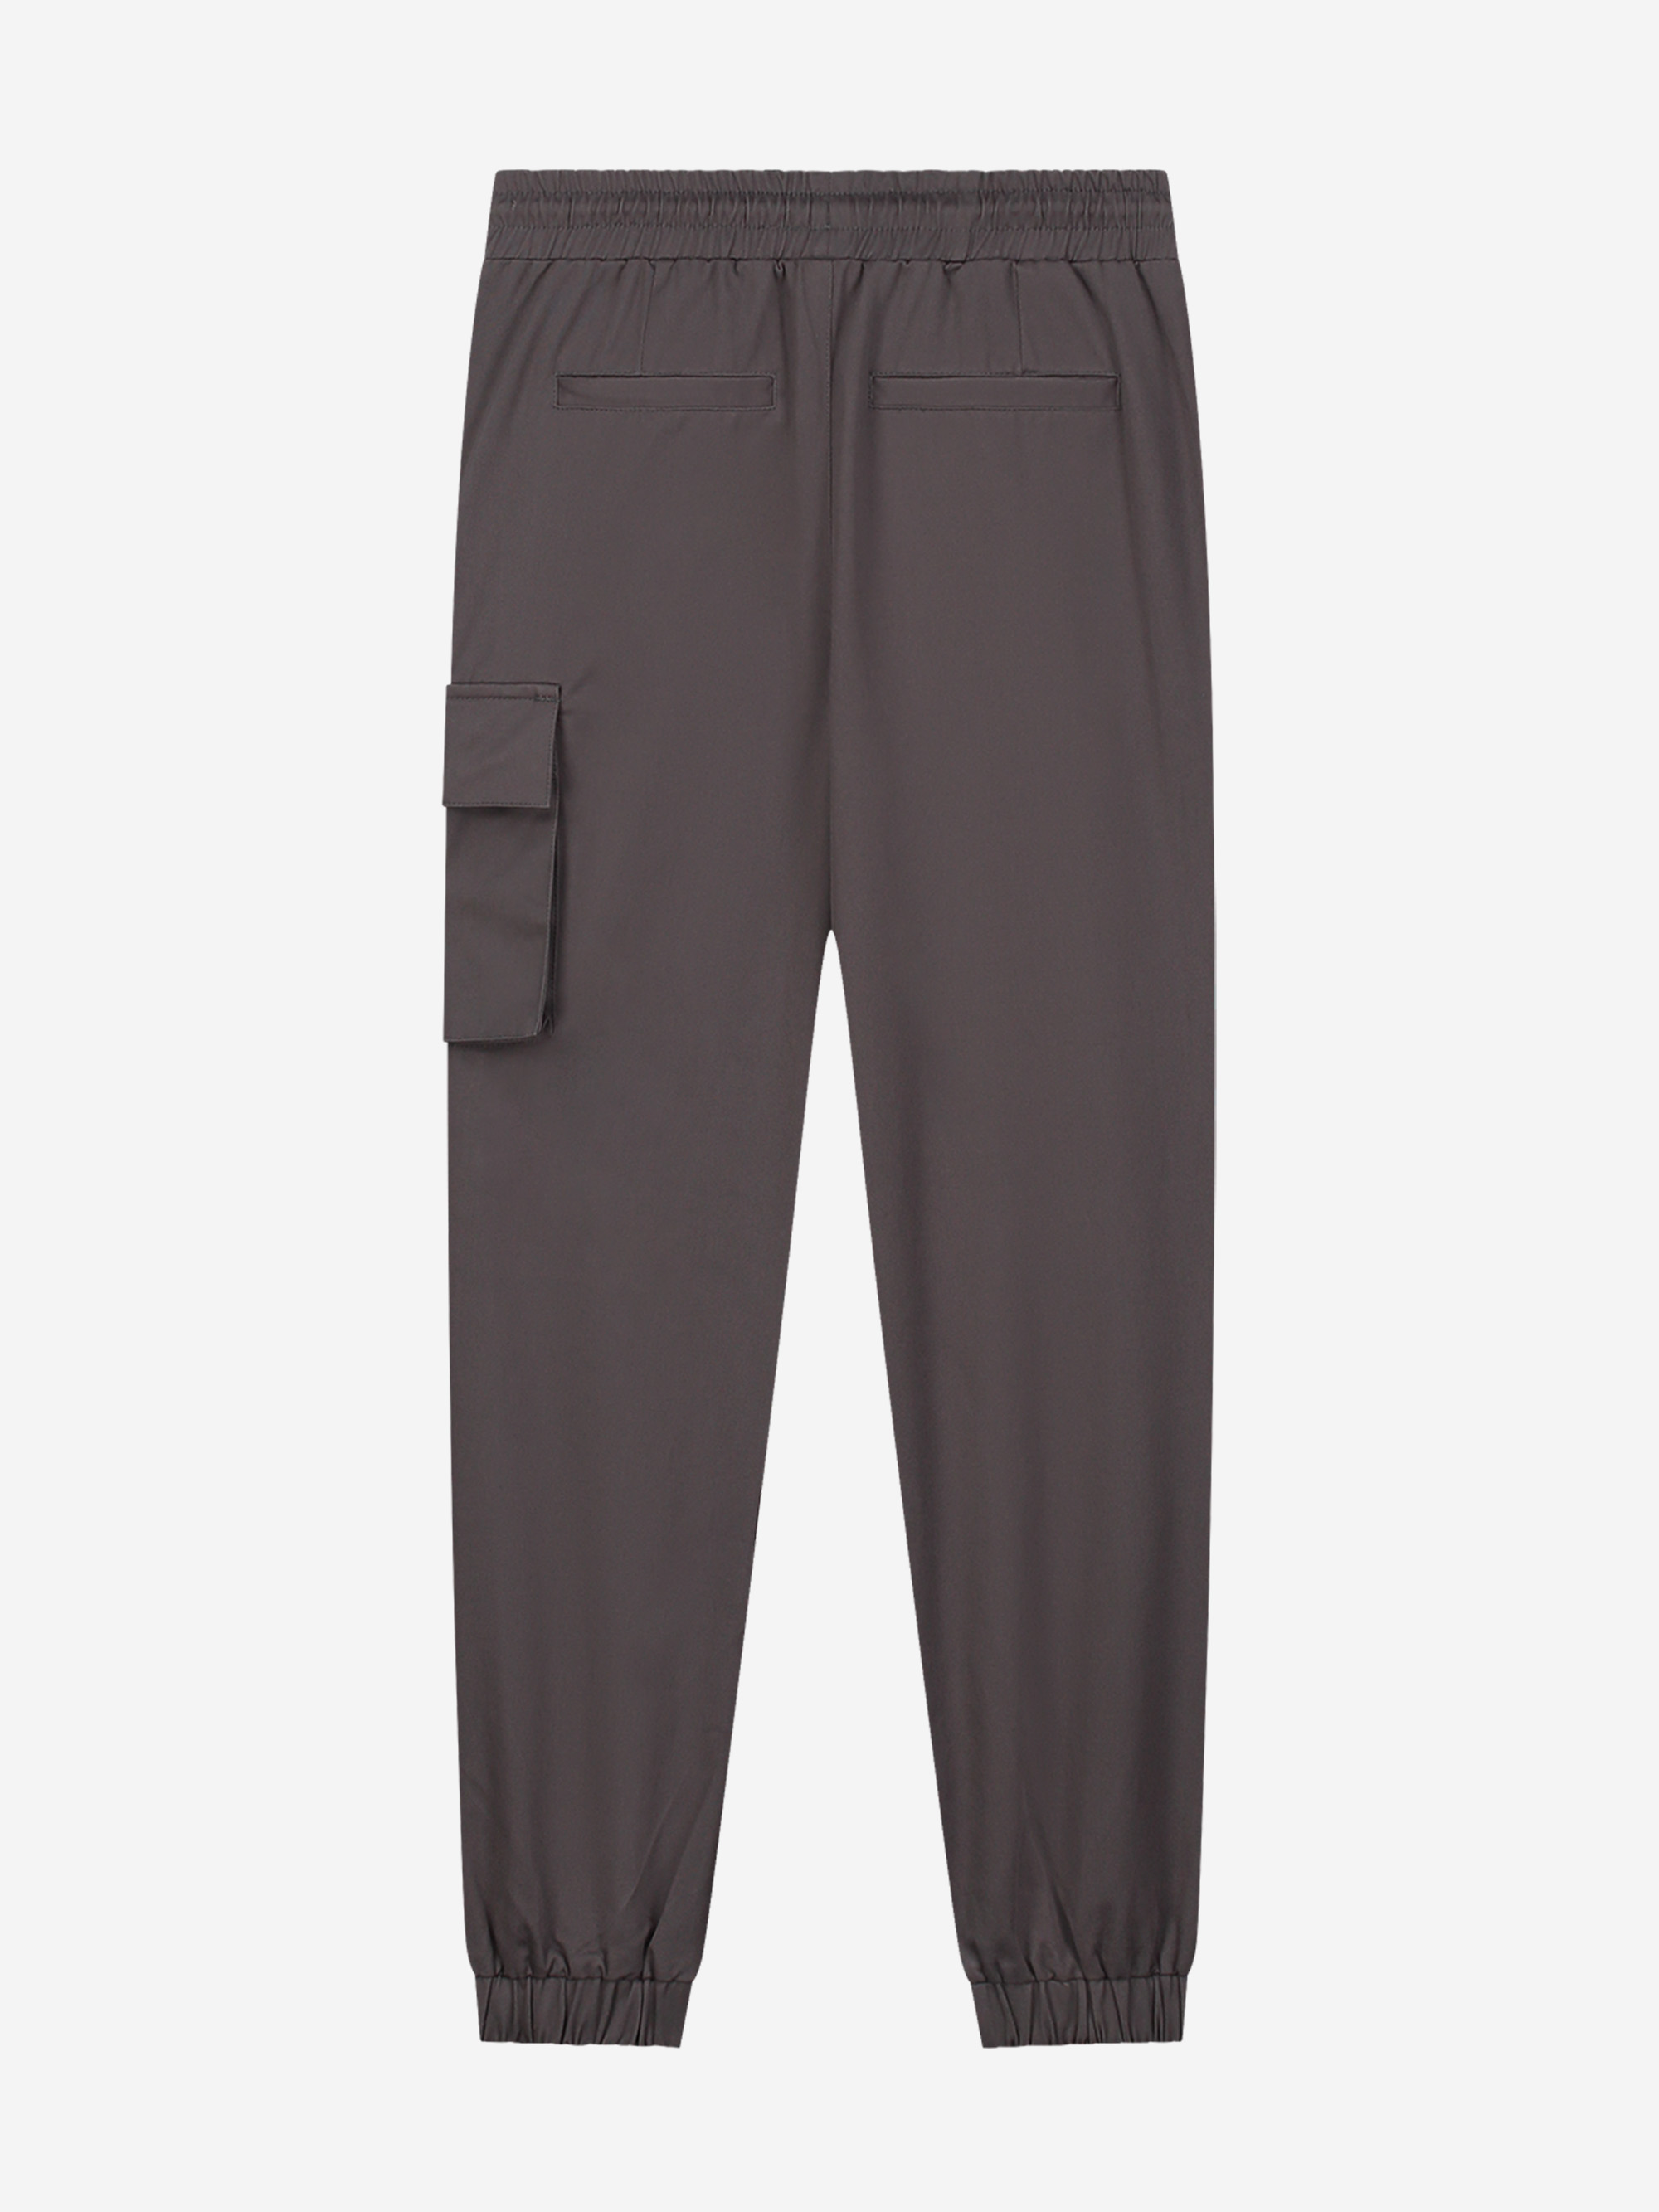 Lathan Trousers